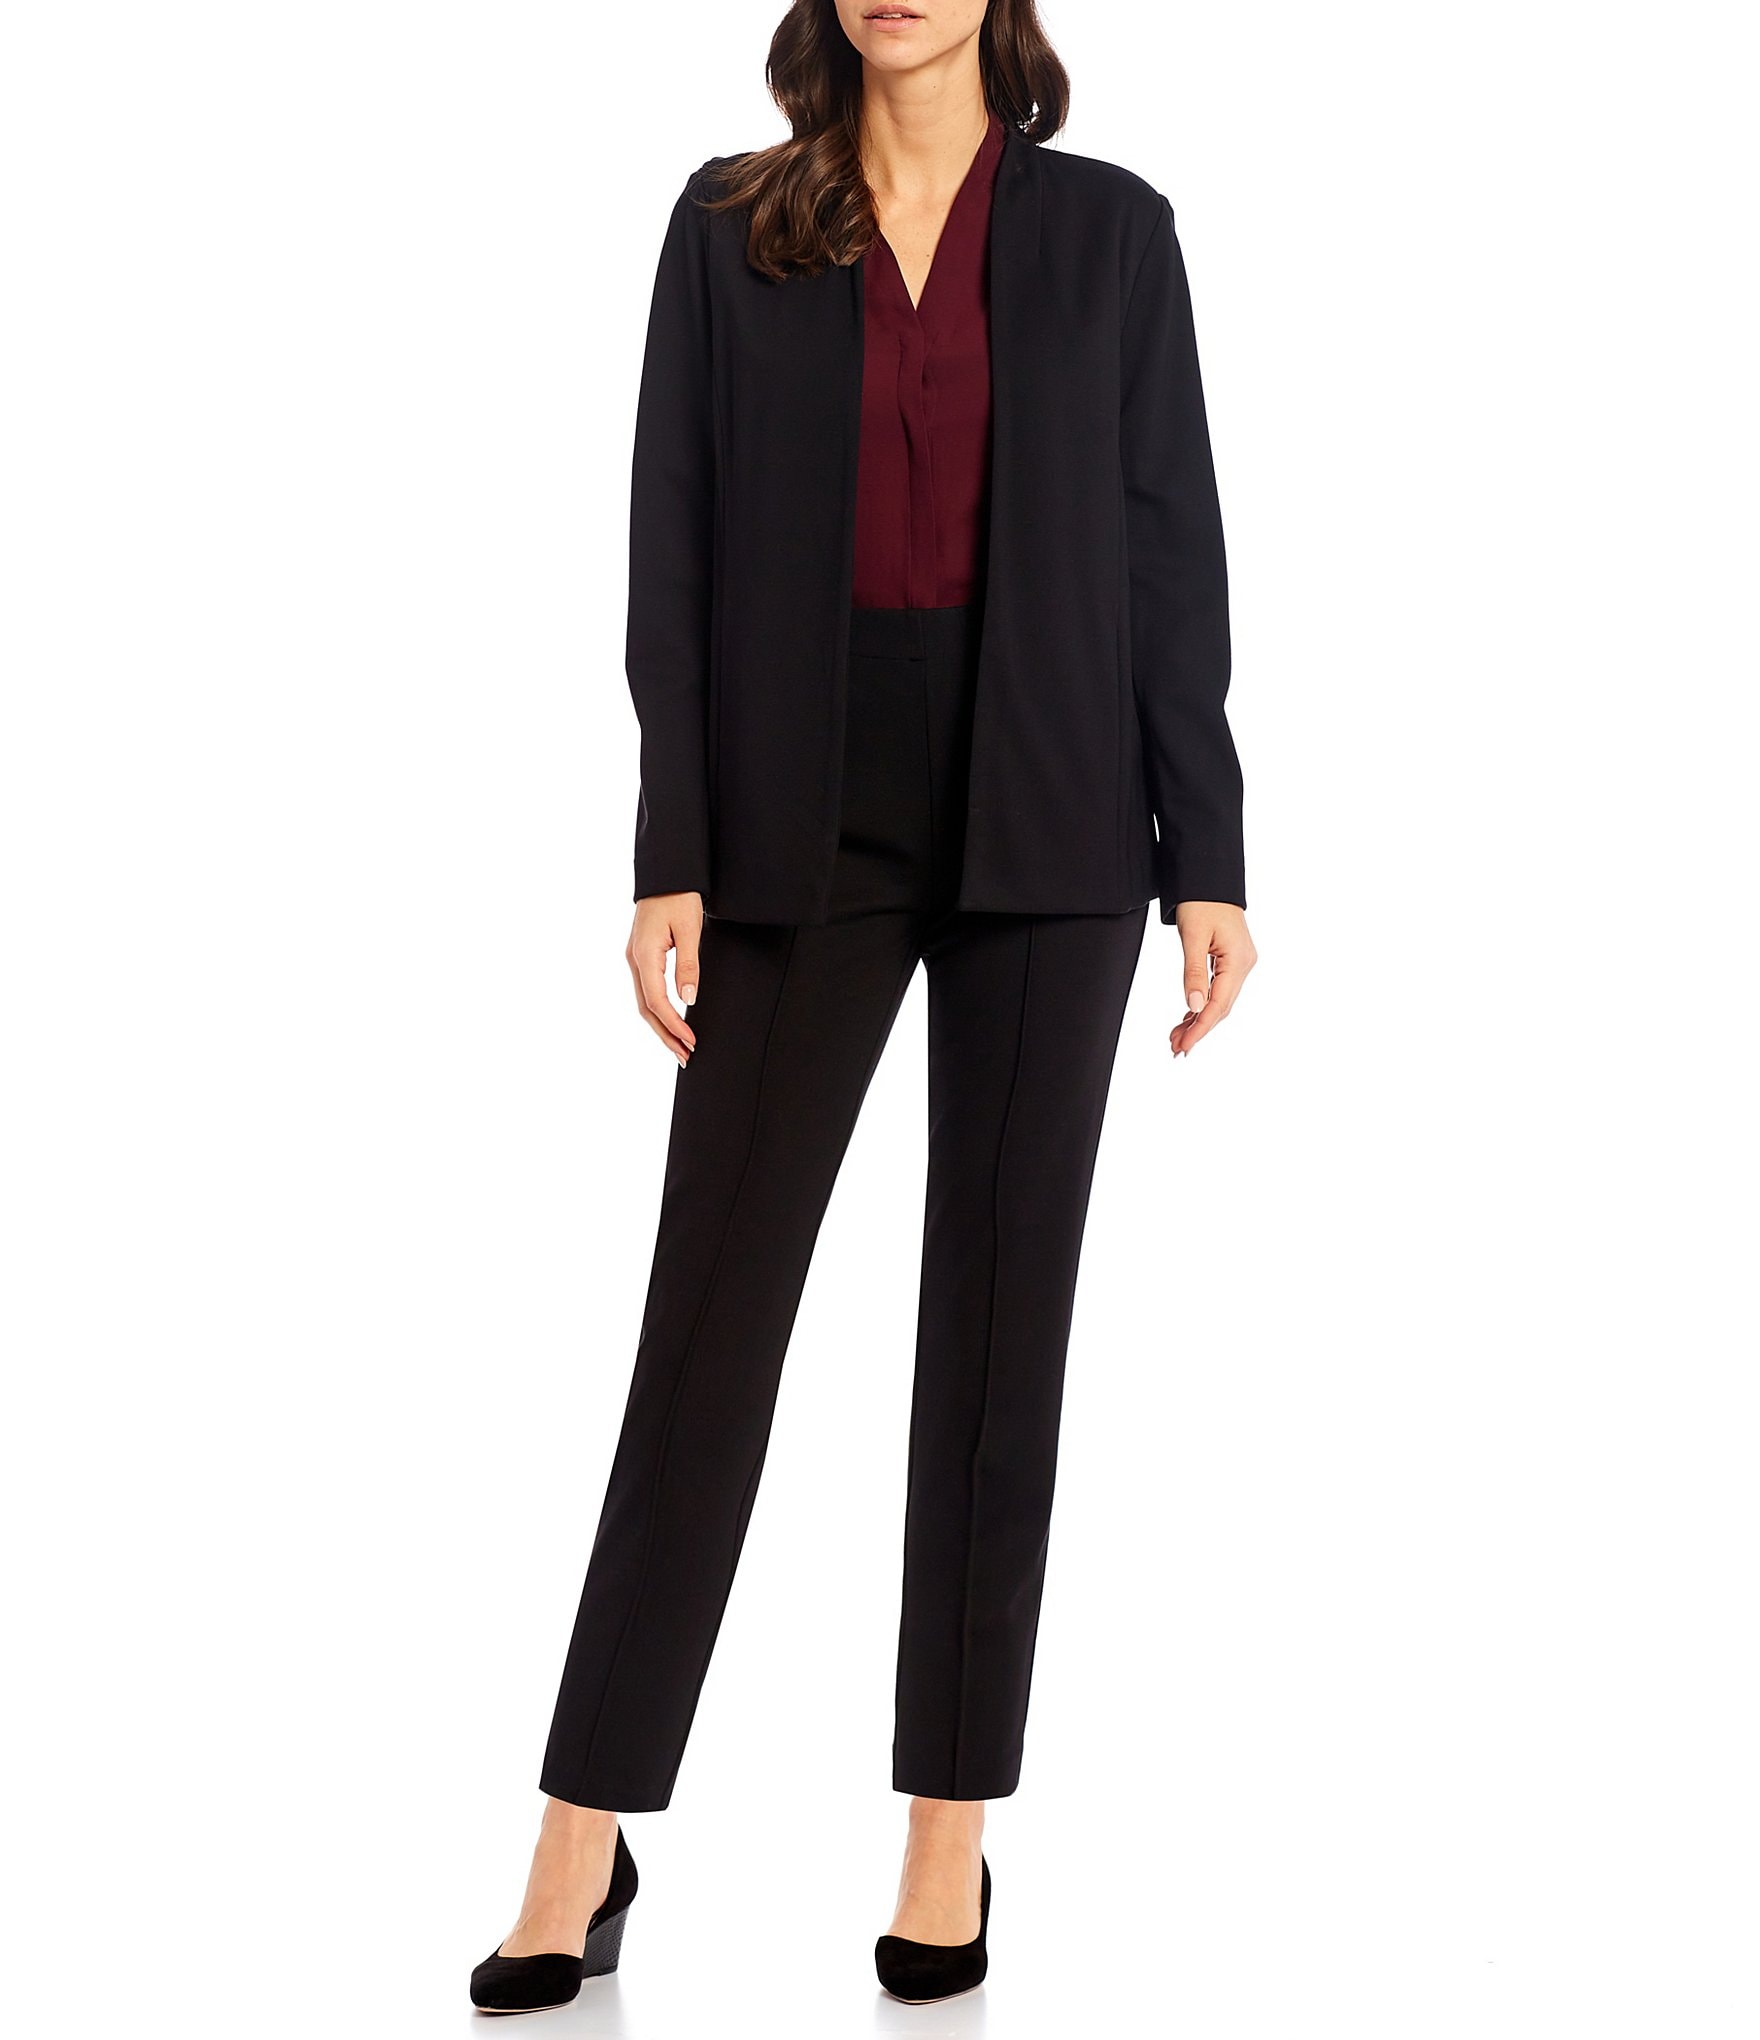 Trouser Suits At New Look  Maharani Designer Boutique